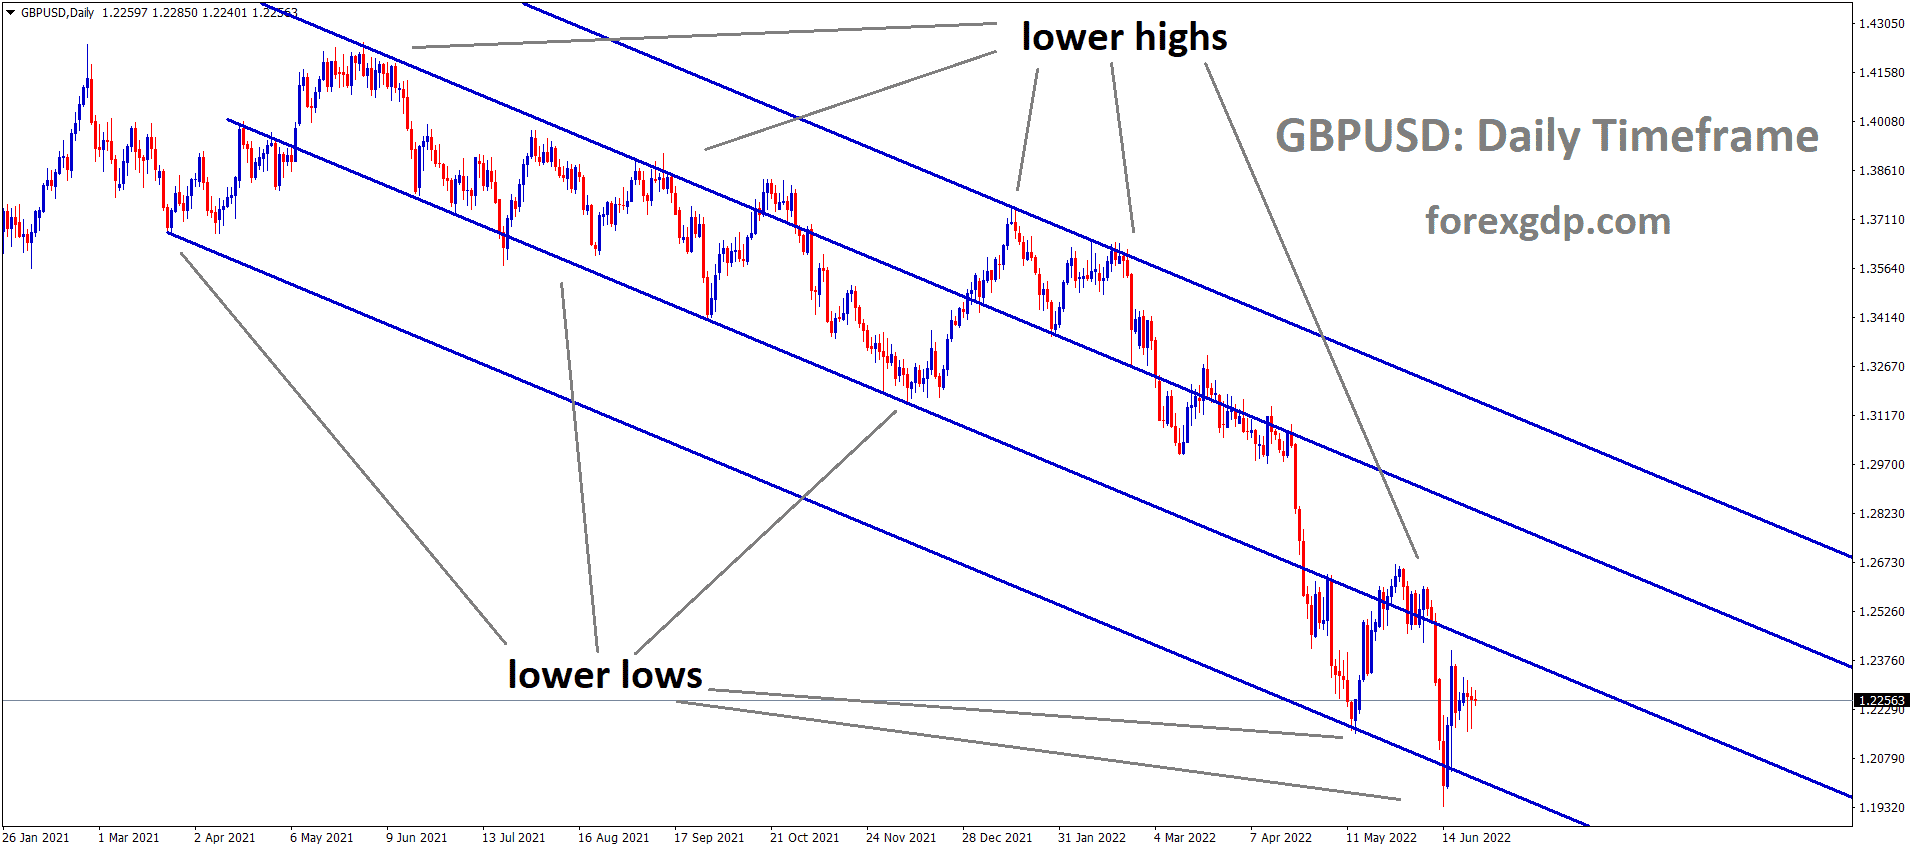 GBPUSD Daily Time Frame Analysis Market is moving in the Descending channel and the Market has rebounded from the Lower Low area of the Channel.